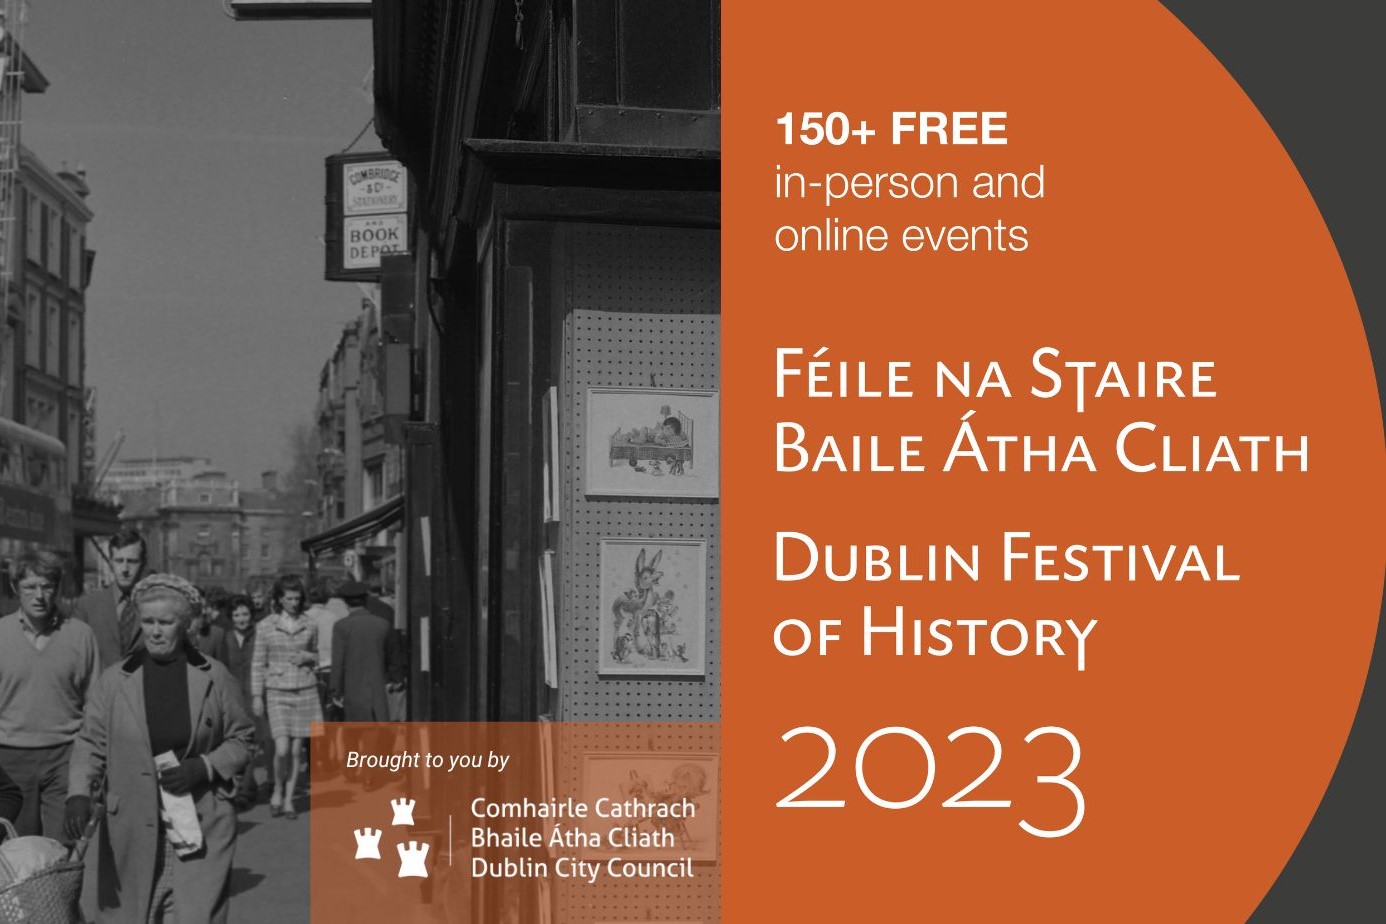 This year’s Dublin festival of History will run from 25 September to 15 October 2023,